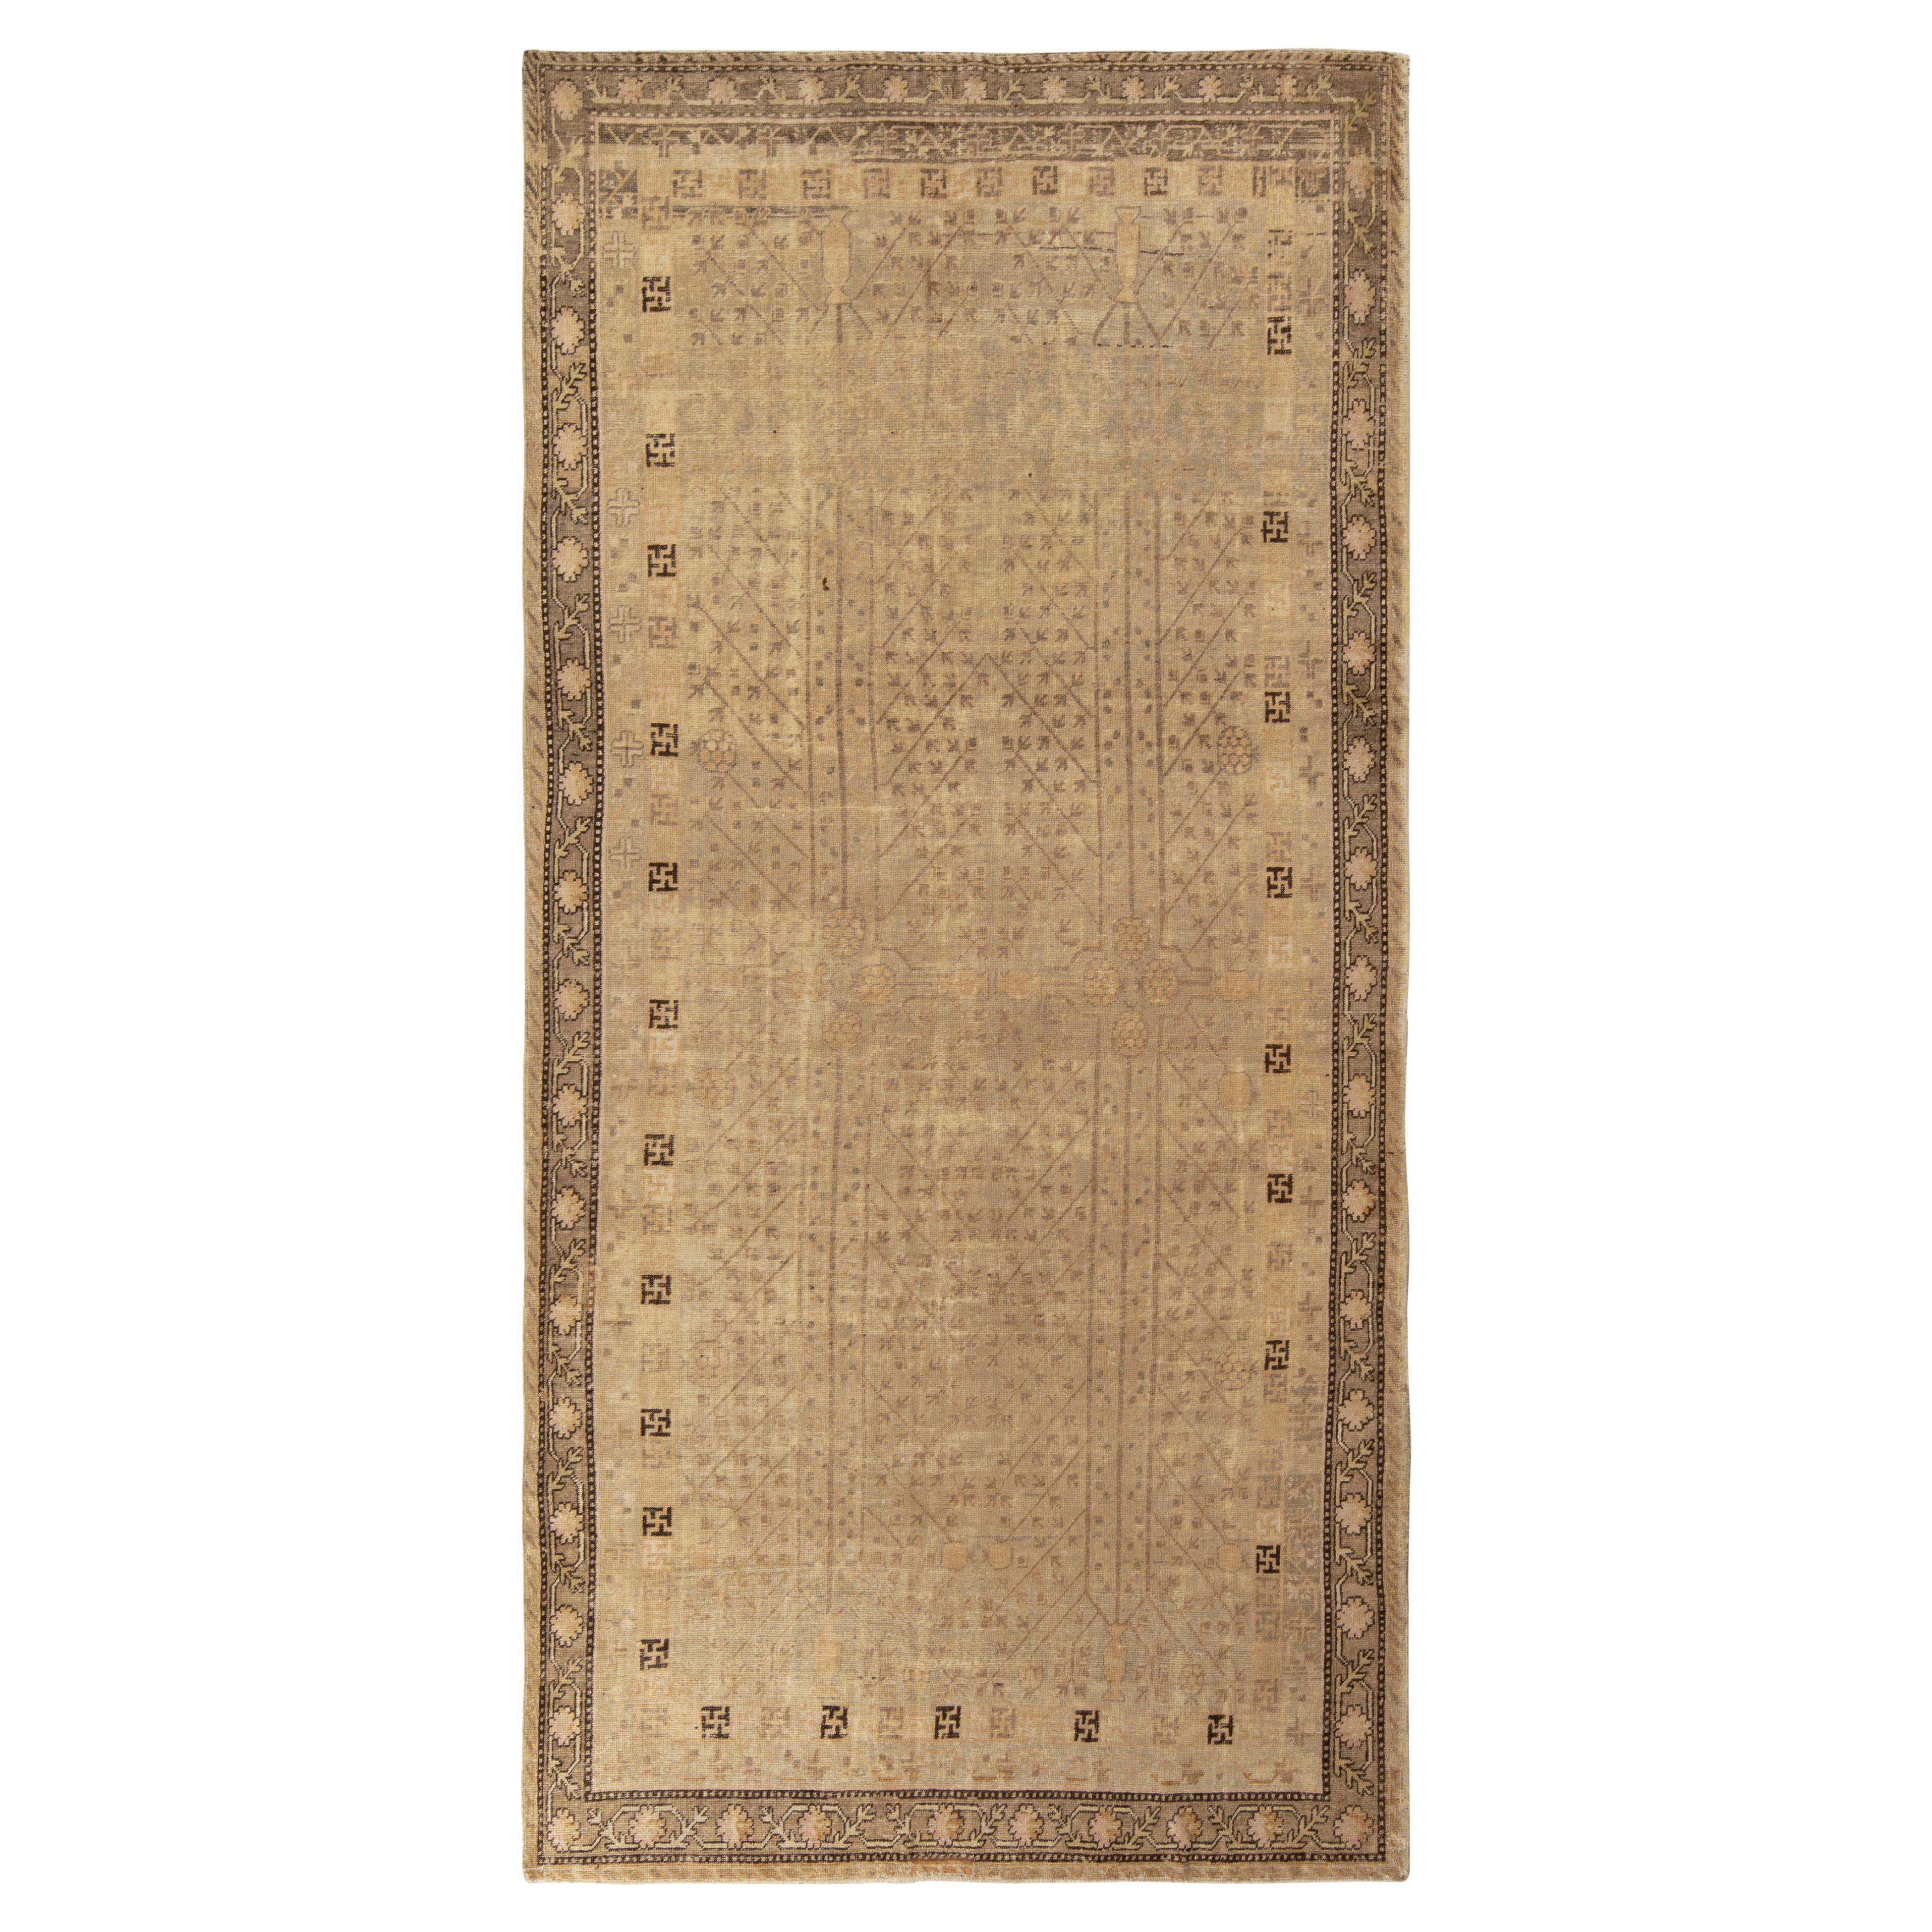 Antique Khotan Runner in an All over Brown Geometric Pattern by Rug & Kilim